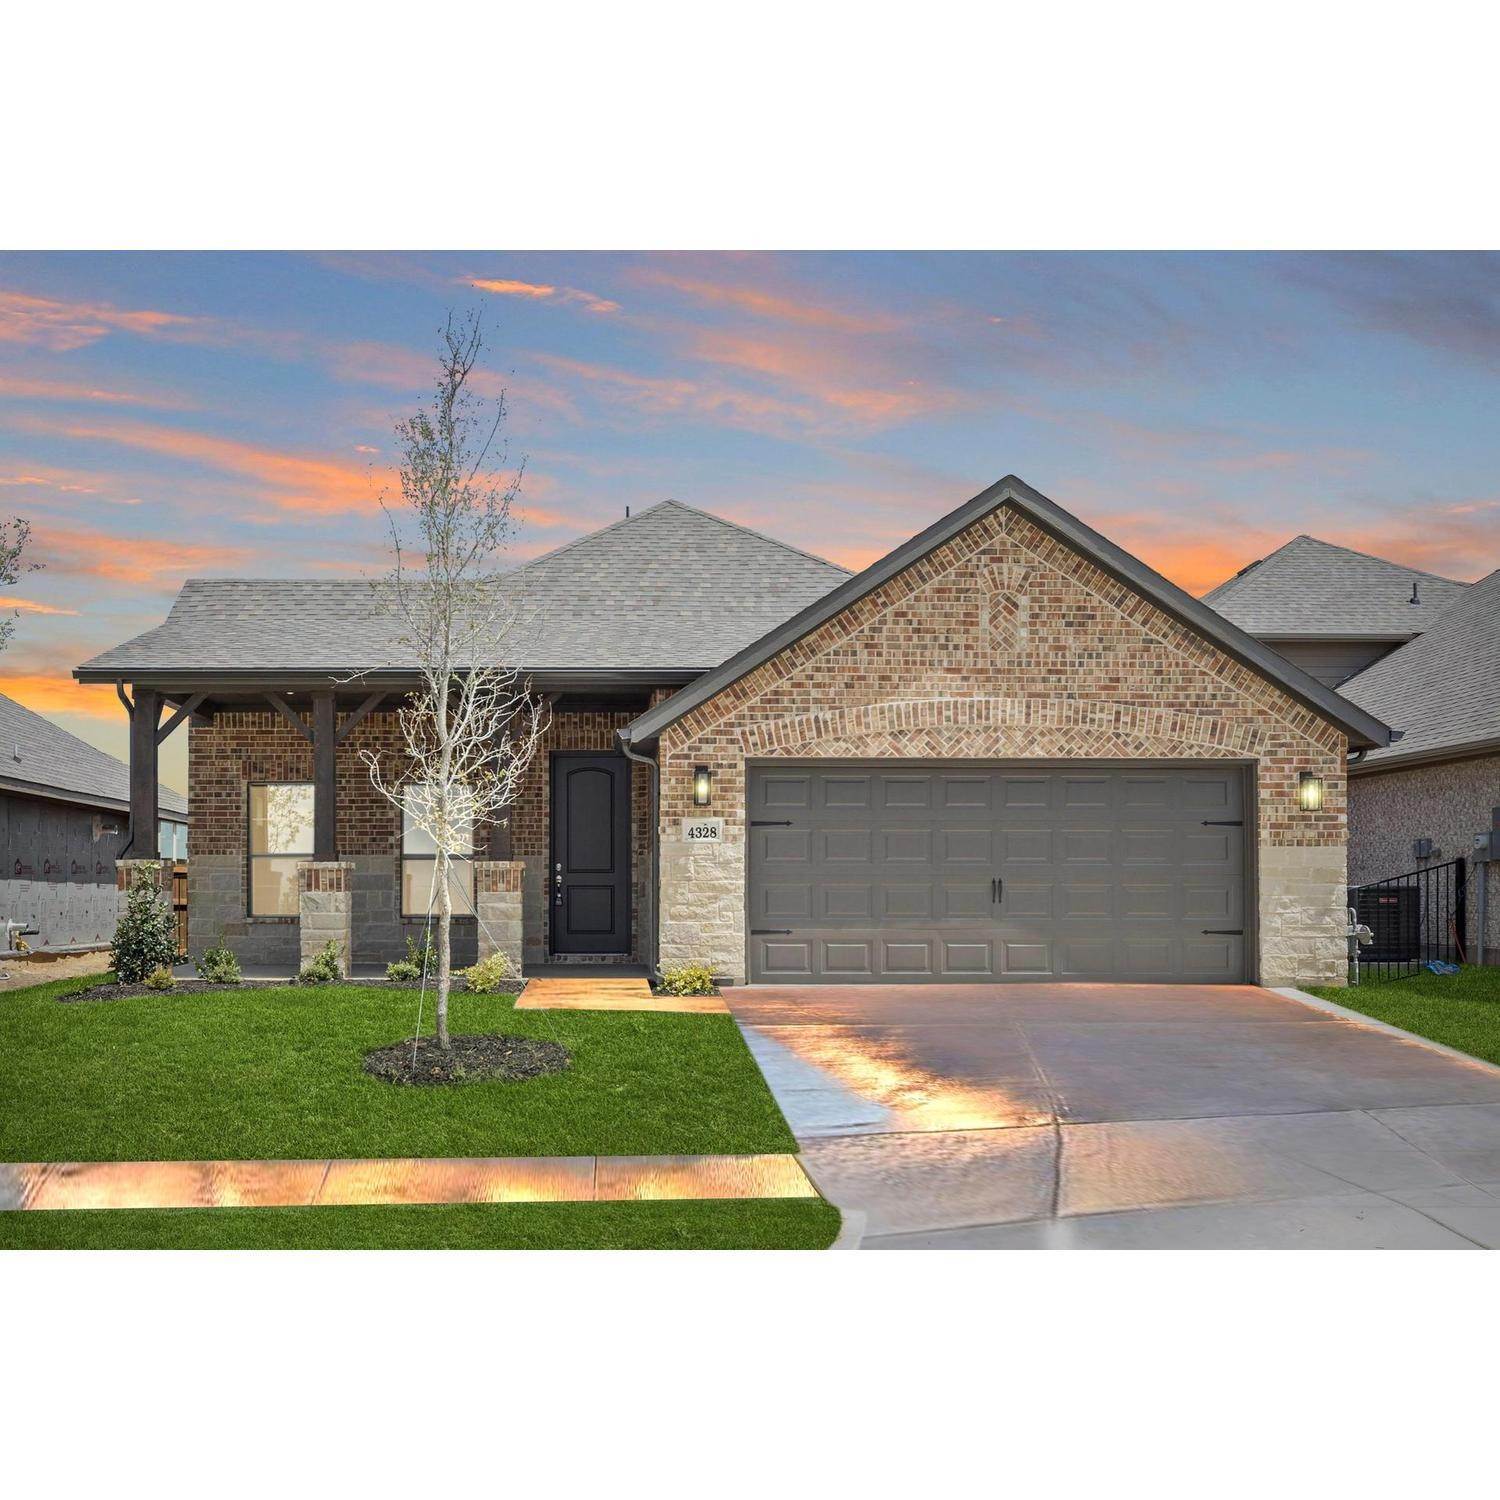 Single Family for Sale at Joshua, TX 76058